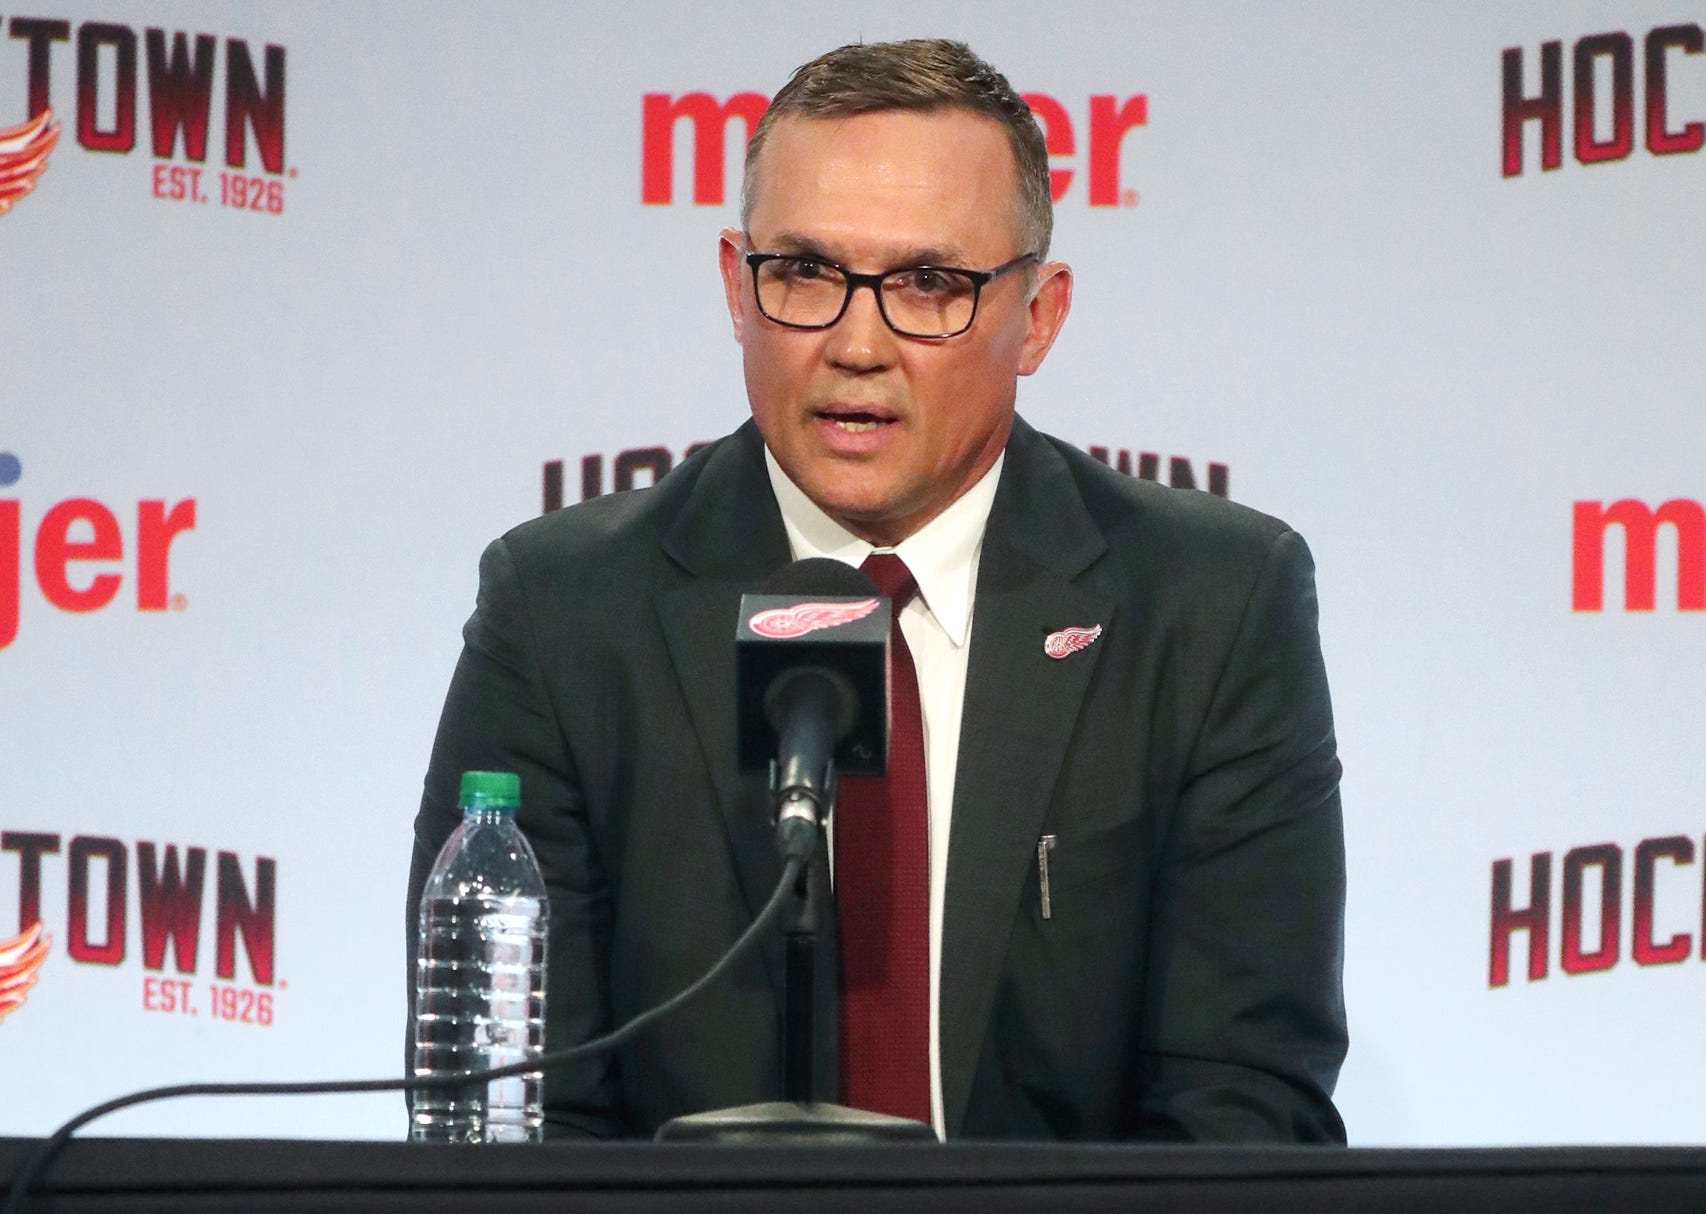 Steve Yzerman, once unrecognized in Detroit, knows &apos;I have a lot of work to do&apos;